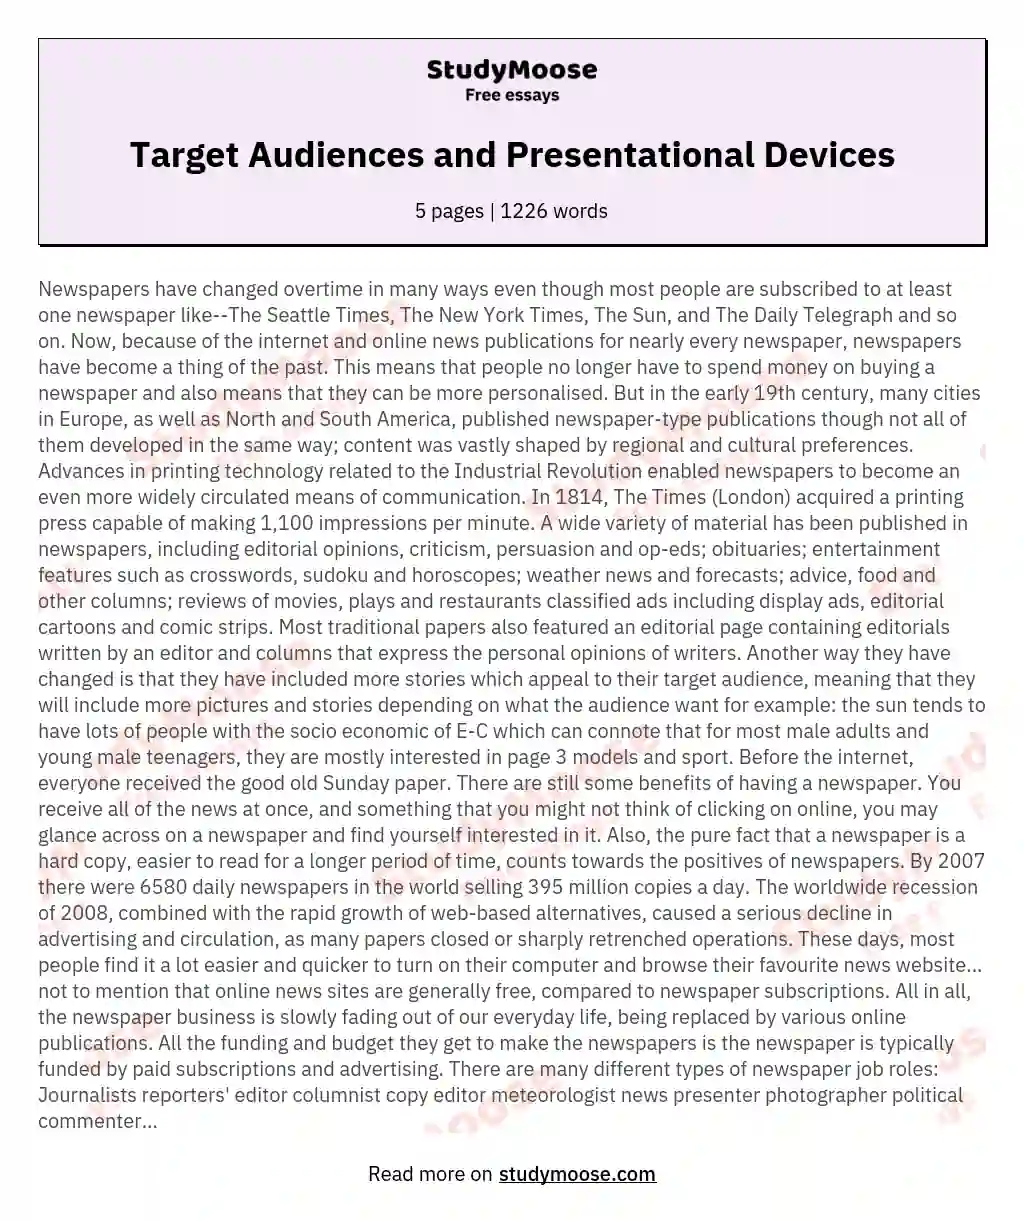 Target Audiences and Presentational Devices essay